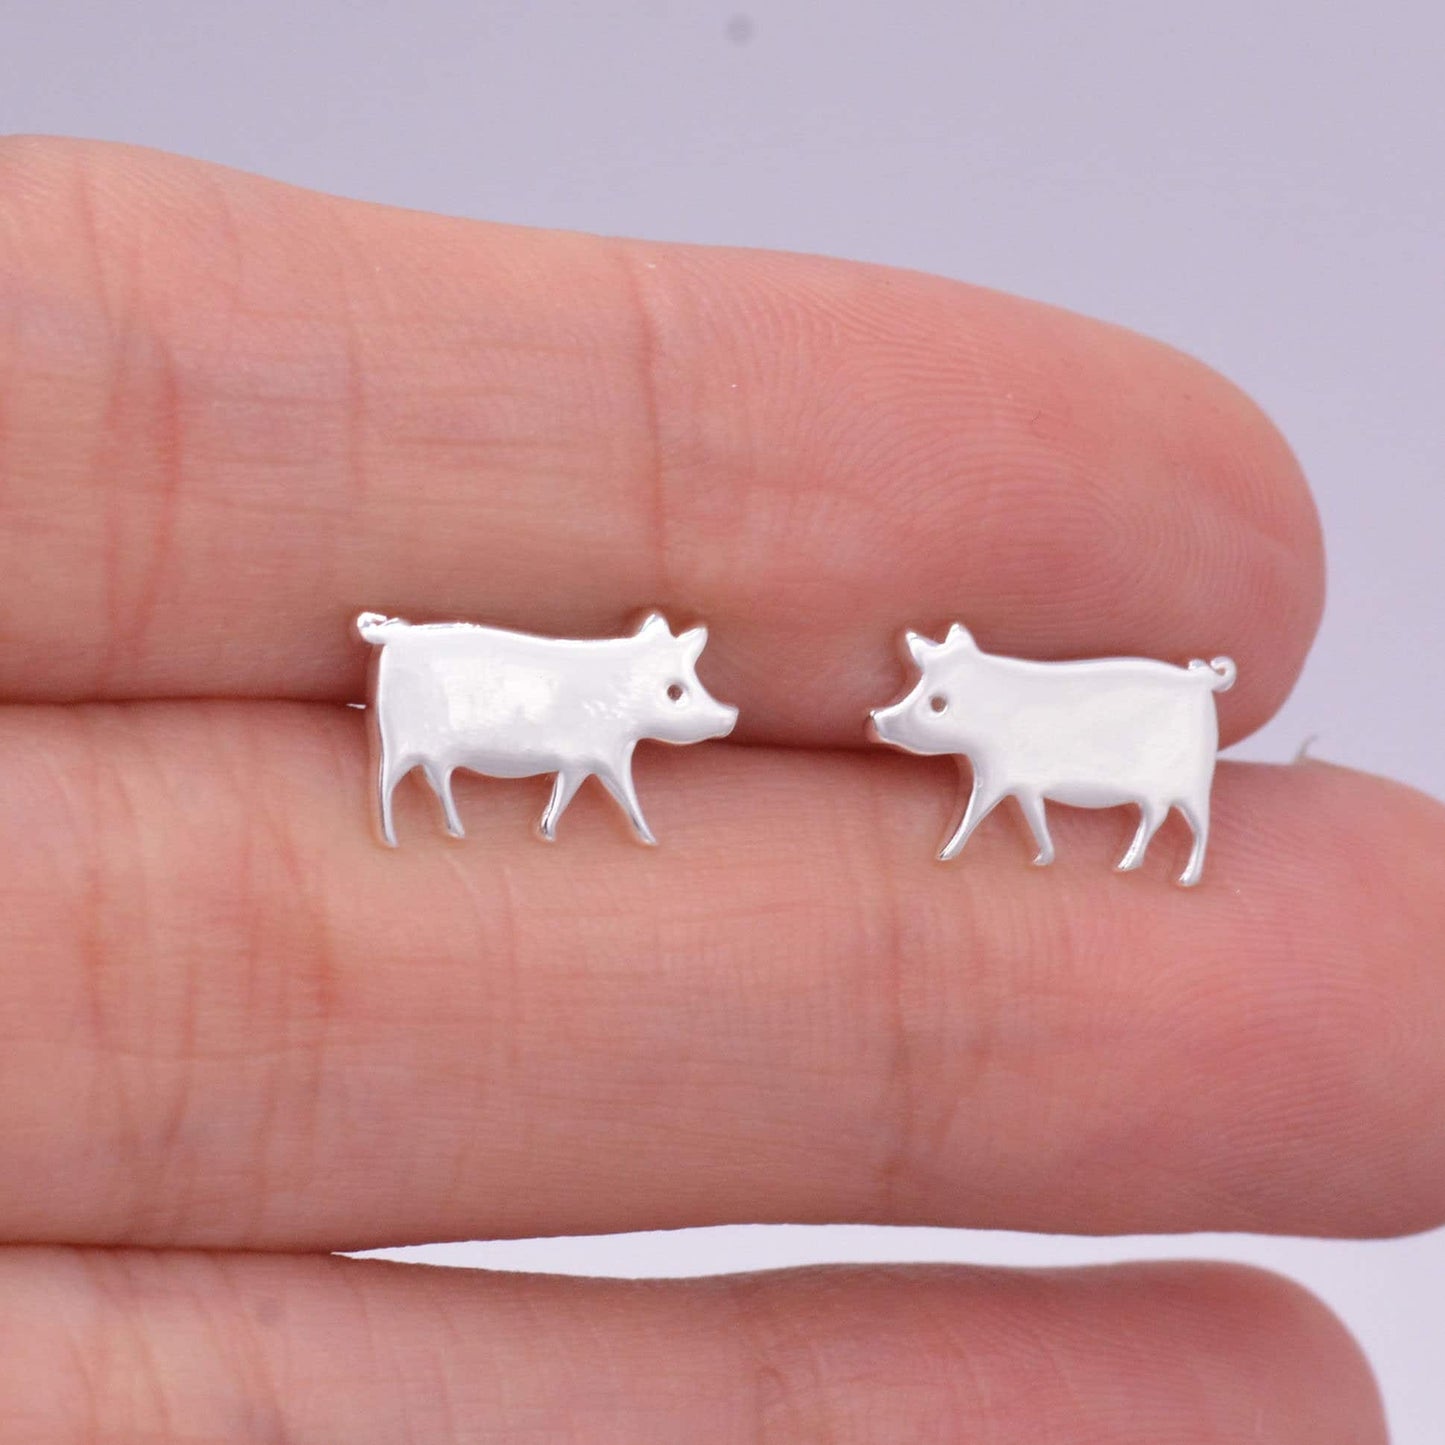 Pig Stud Earrings in Sterling Silver, Cute Fun Quirky, Jewellery Gift for Her, Animal Lover, Nature Inspired, Pigs Can Fly Stud L11